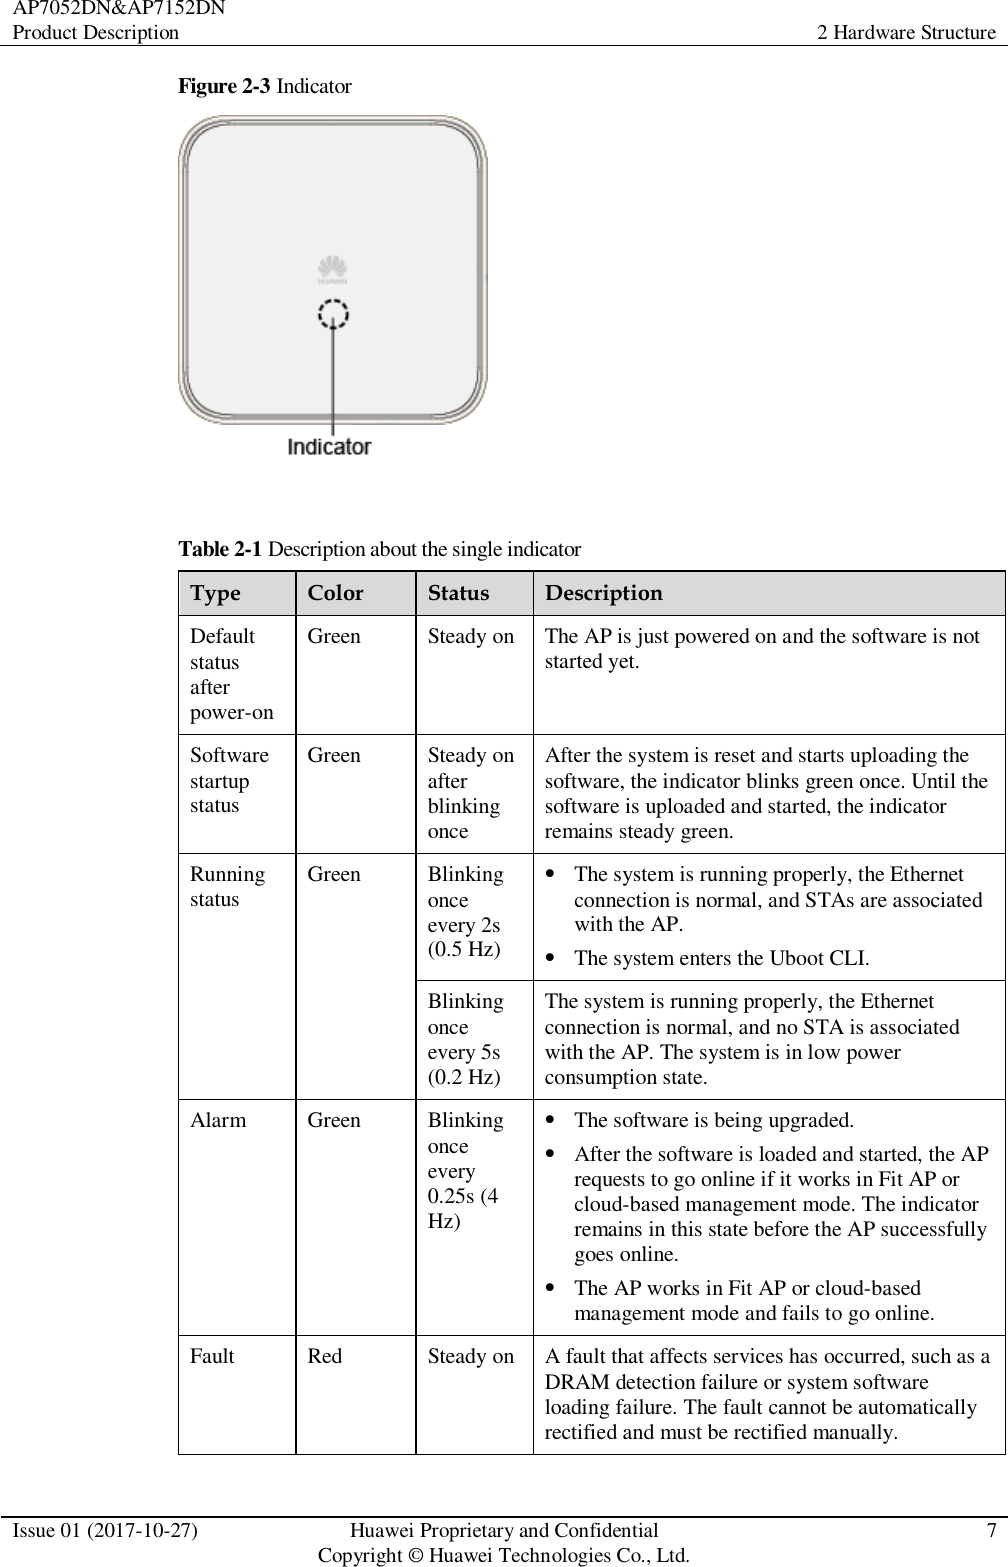 AP7052DN&amp;AP7152DN Product Description 2 Hardware Structure  Issue 01 (2017-10-27) Huawei Proprietary and Confidential                                     Copyright © Huawei Technologies Co., Ltd. 7  Figure 2-3 Indicator   Table 2-1 Description about the single indicator Type Color Status Description Default status after power-on Green Steady on The AP is just powered on and the software is not started yet. Software startup status Green Steady on after blinking once After the system is reset and starts uploading the software, the indicator blinks green once. Until the software is uploaded and started, the indicator remains steady green. Running status Green Blinking once every 2s (0.5 Hz)  The system is running properly, the Ethernet connection is normal, and STAs are associated with the AP.  The system enters the Uboot CLI. Blinking once every 5s (0.2 Hz) The system is running properly, the Ethernet connection is normal, and no STA is associated with the AP. The system is in low power consumption state. Alarm Green Blinking once every 0.25s (4 Hz)  The software is being upgraded.  After the software is loaded and started, the AP requests to go online if it works in Fit AP or cloud-based management mode. The indicator remains in this state before the AP successfully goes online.  The AP works in Fit AP or cloud-based management mode and fails to go online. Fault Red Steady on A fault that affects services has occurred, such as a DRAM detection failure or system software loading failure. The fault cannot be automatically rectified and must be rectified manually. 